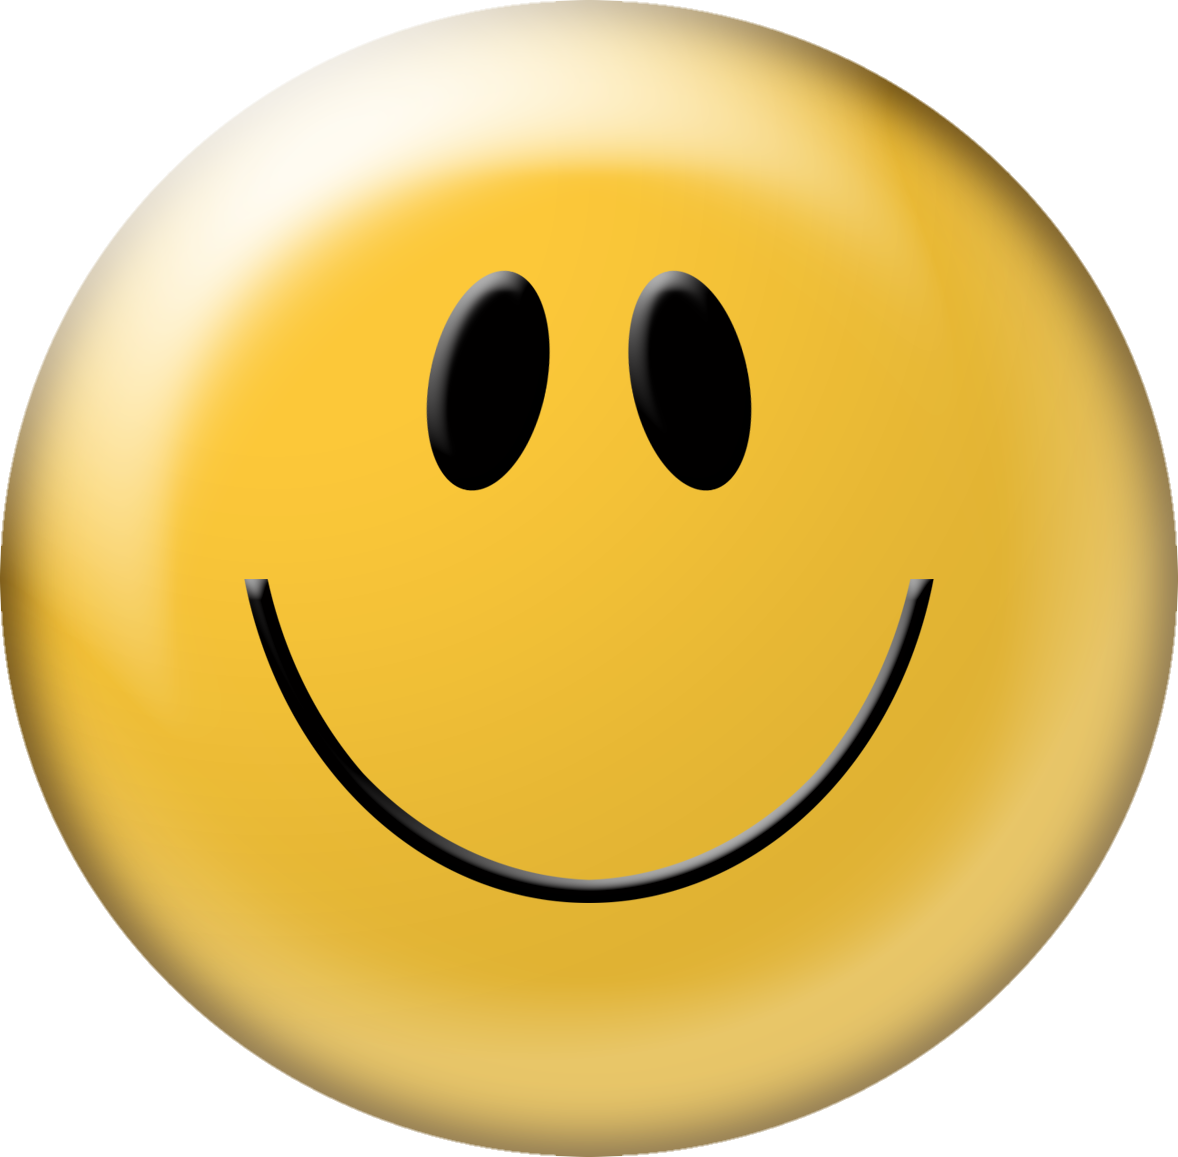 smiley-face-png-from-pngfre-13